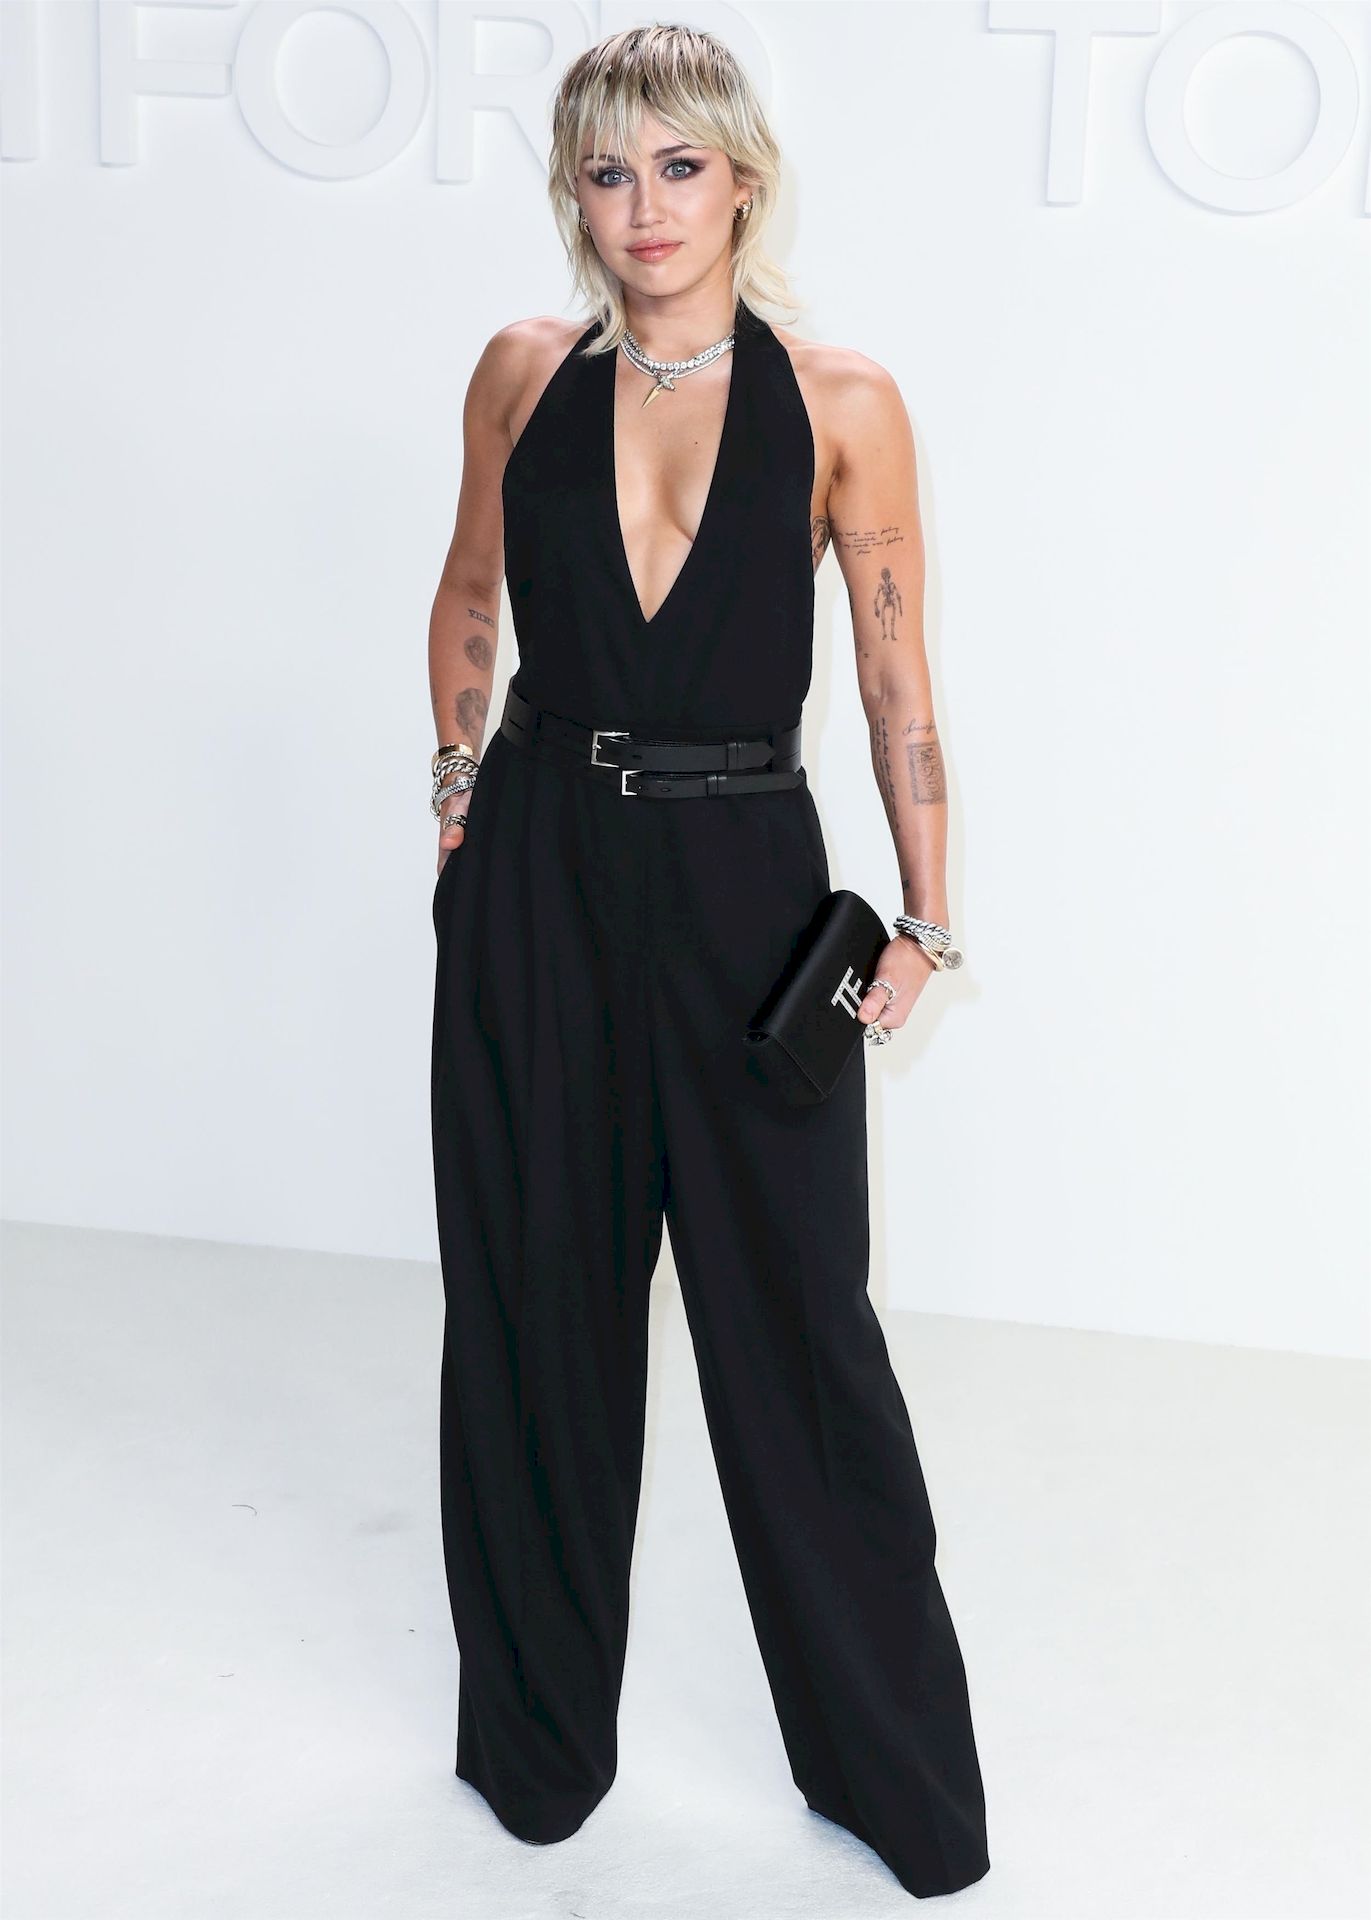 Miley-Cyrus-Looks-Sexy-at-the-Tom-Ford-Autumn_Winter-2020-Fashion-Show-0030.jpg